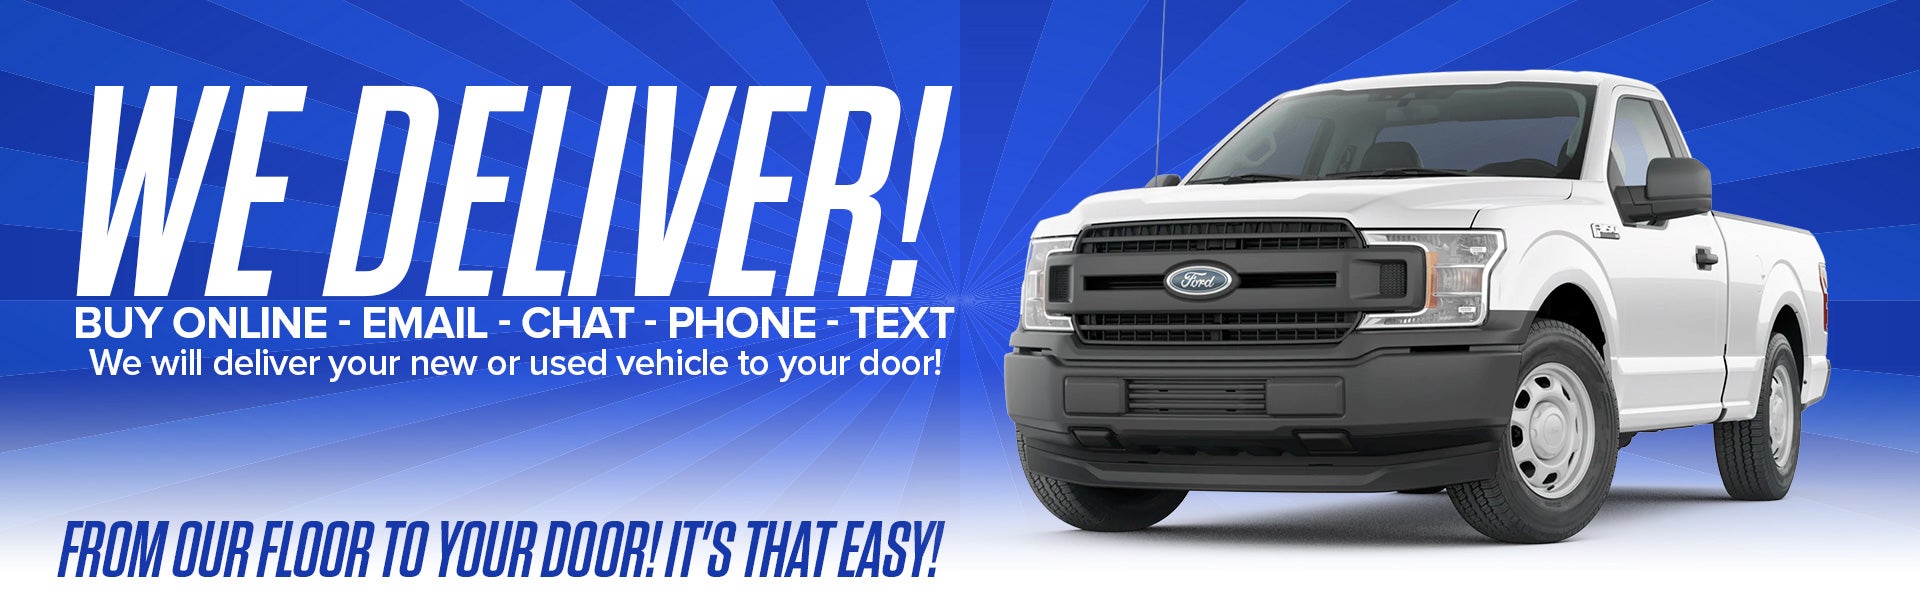 We Deliver at Iron City Ford in Birmingham, AL